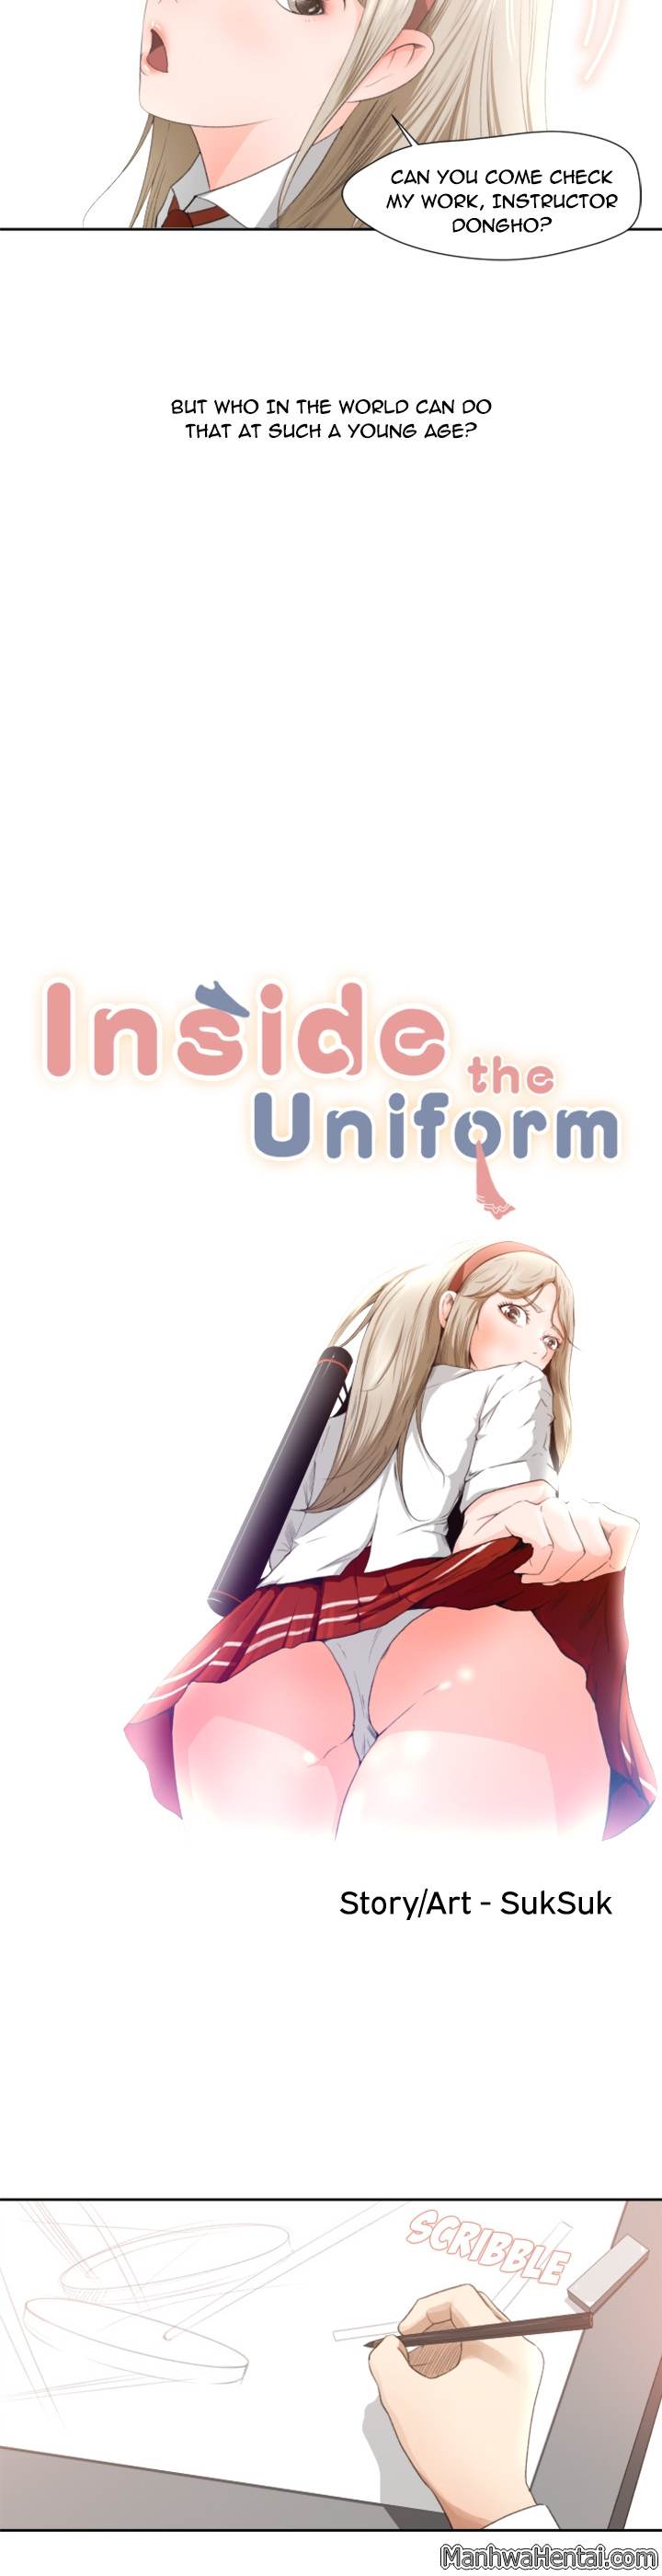 Inside the Uniform - Chapter 1 Page 3